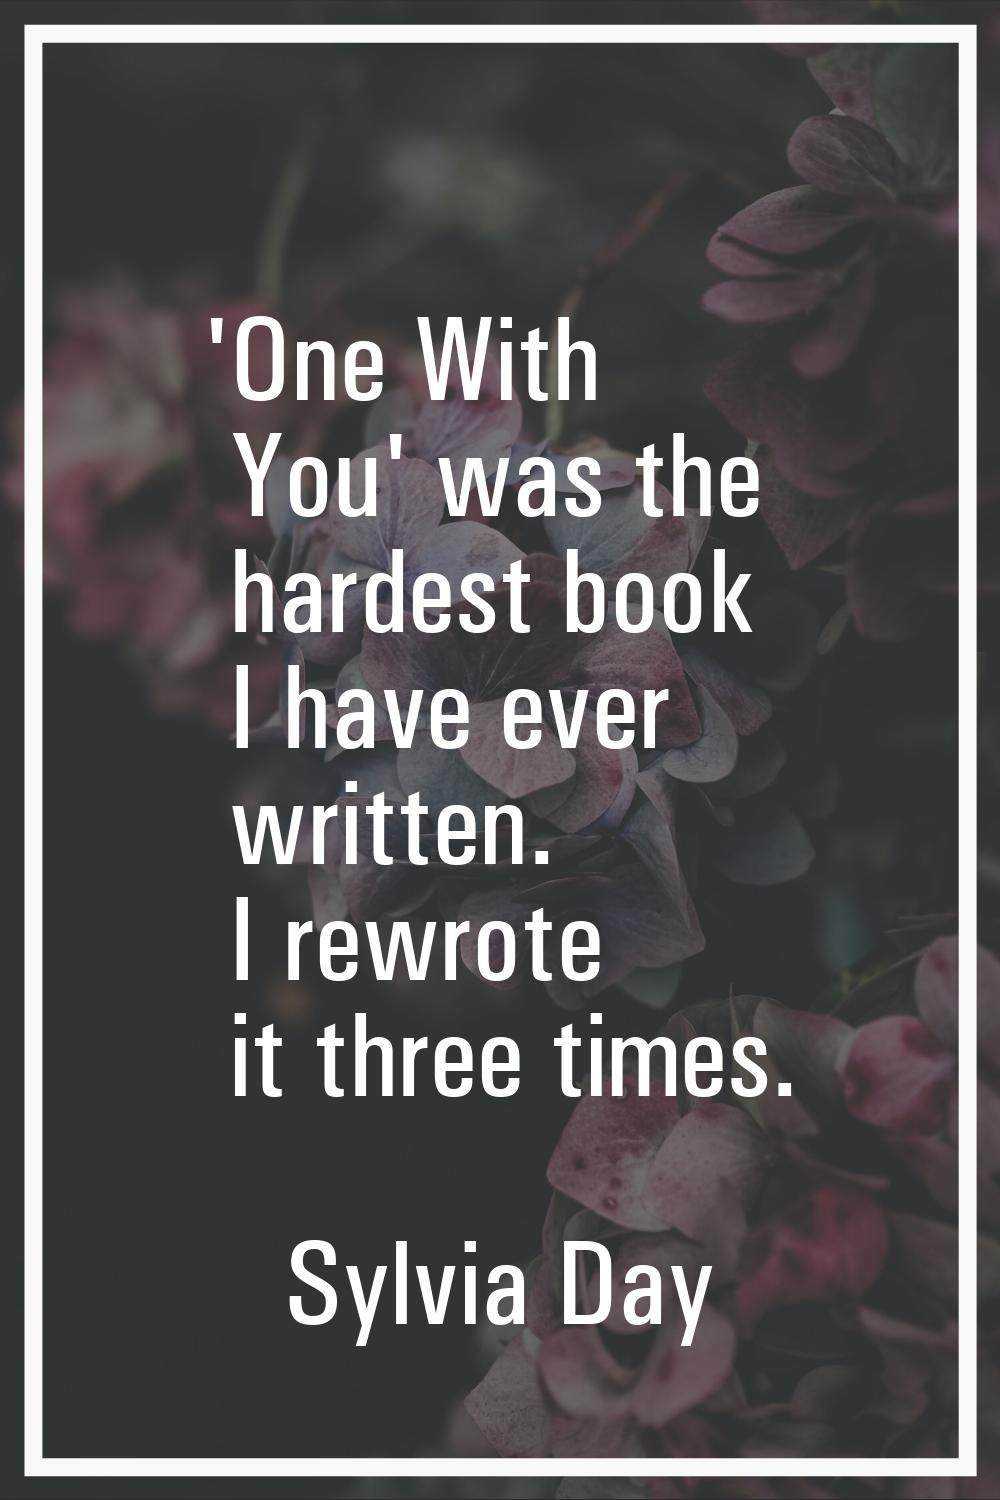 'One With You' was the hardest book I have ever written. I rewrote it three times.